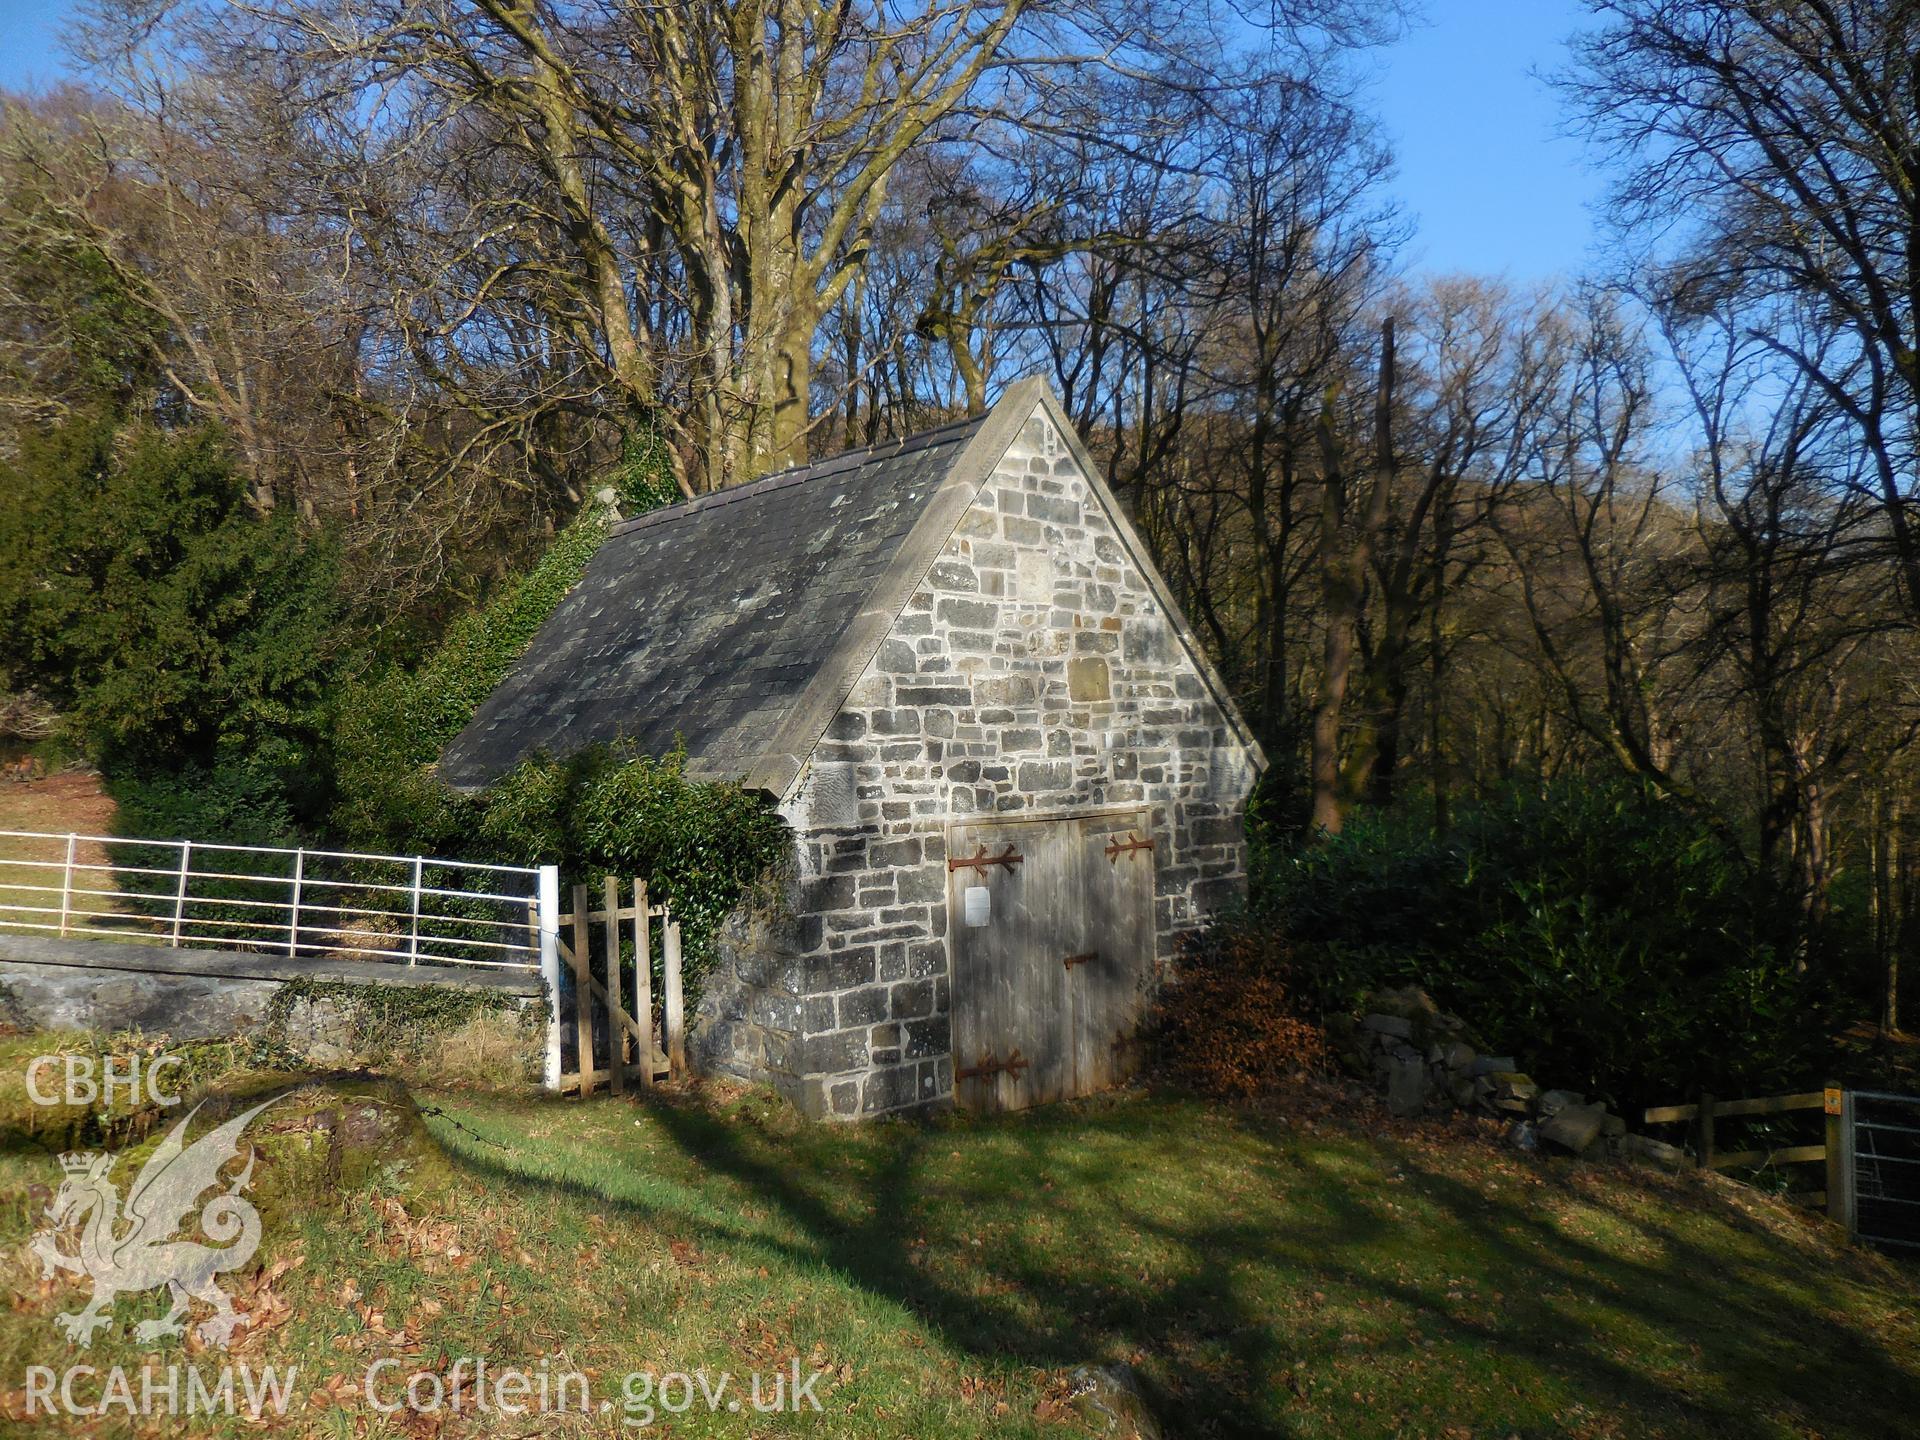 Colour digital photograph showing the hearse house at Llanwddyn church, taken in February 2022.